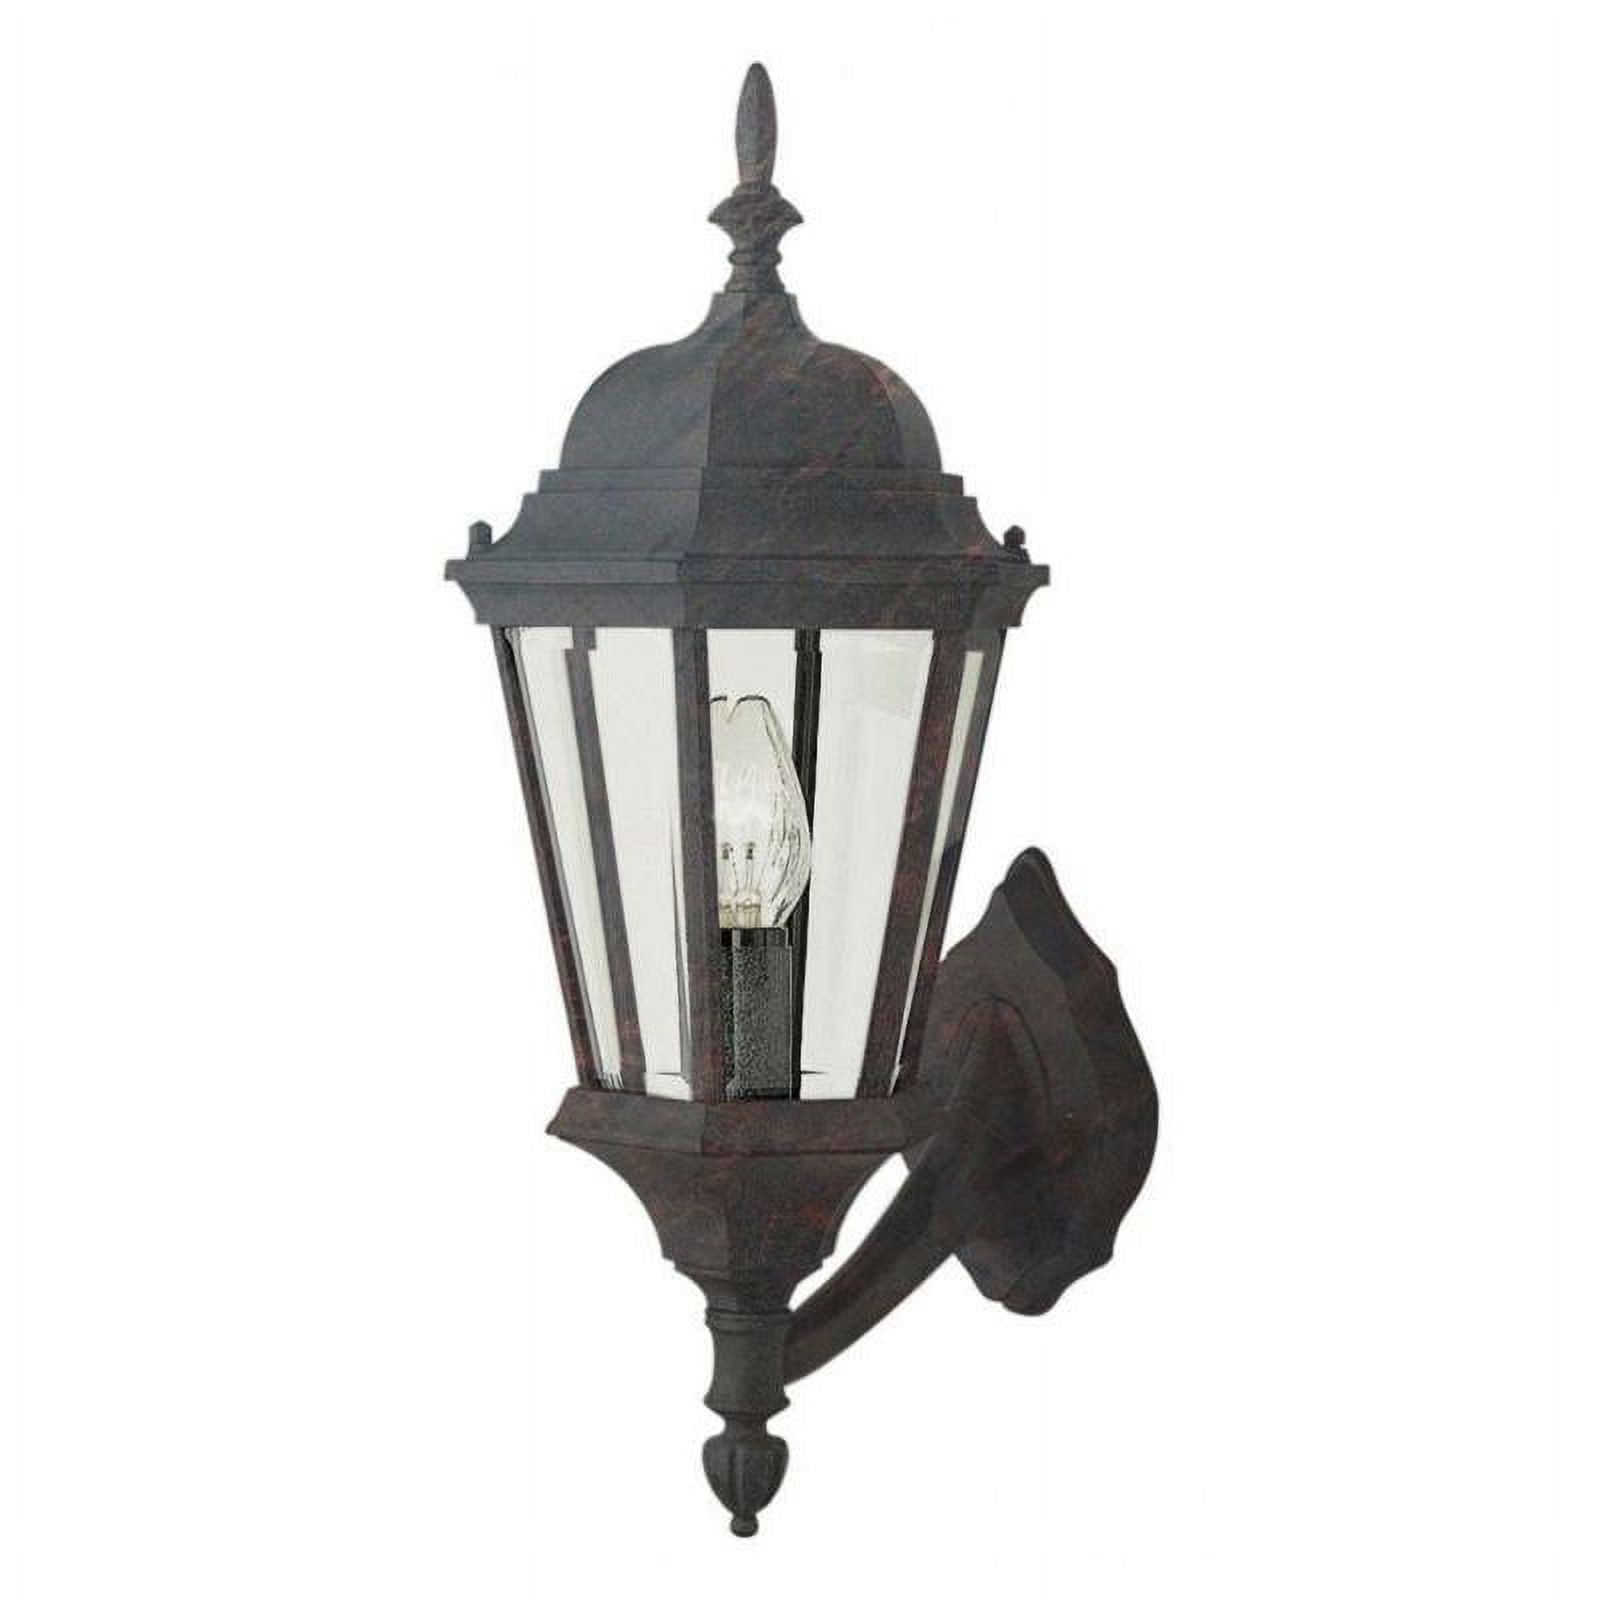 Trans Globe Lighting 4250 1-Light Up Lighting Outdoor Wall Sconce from the Outdoor Collection - image 2 of 2